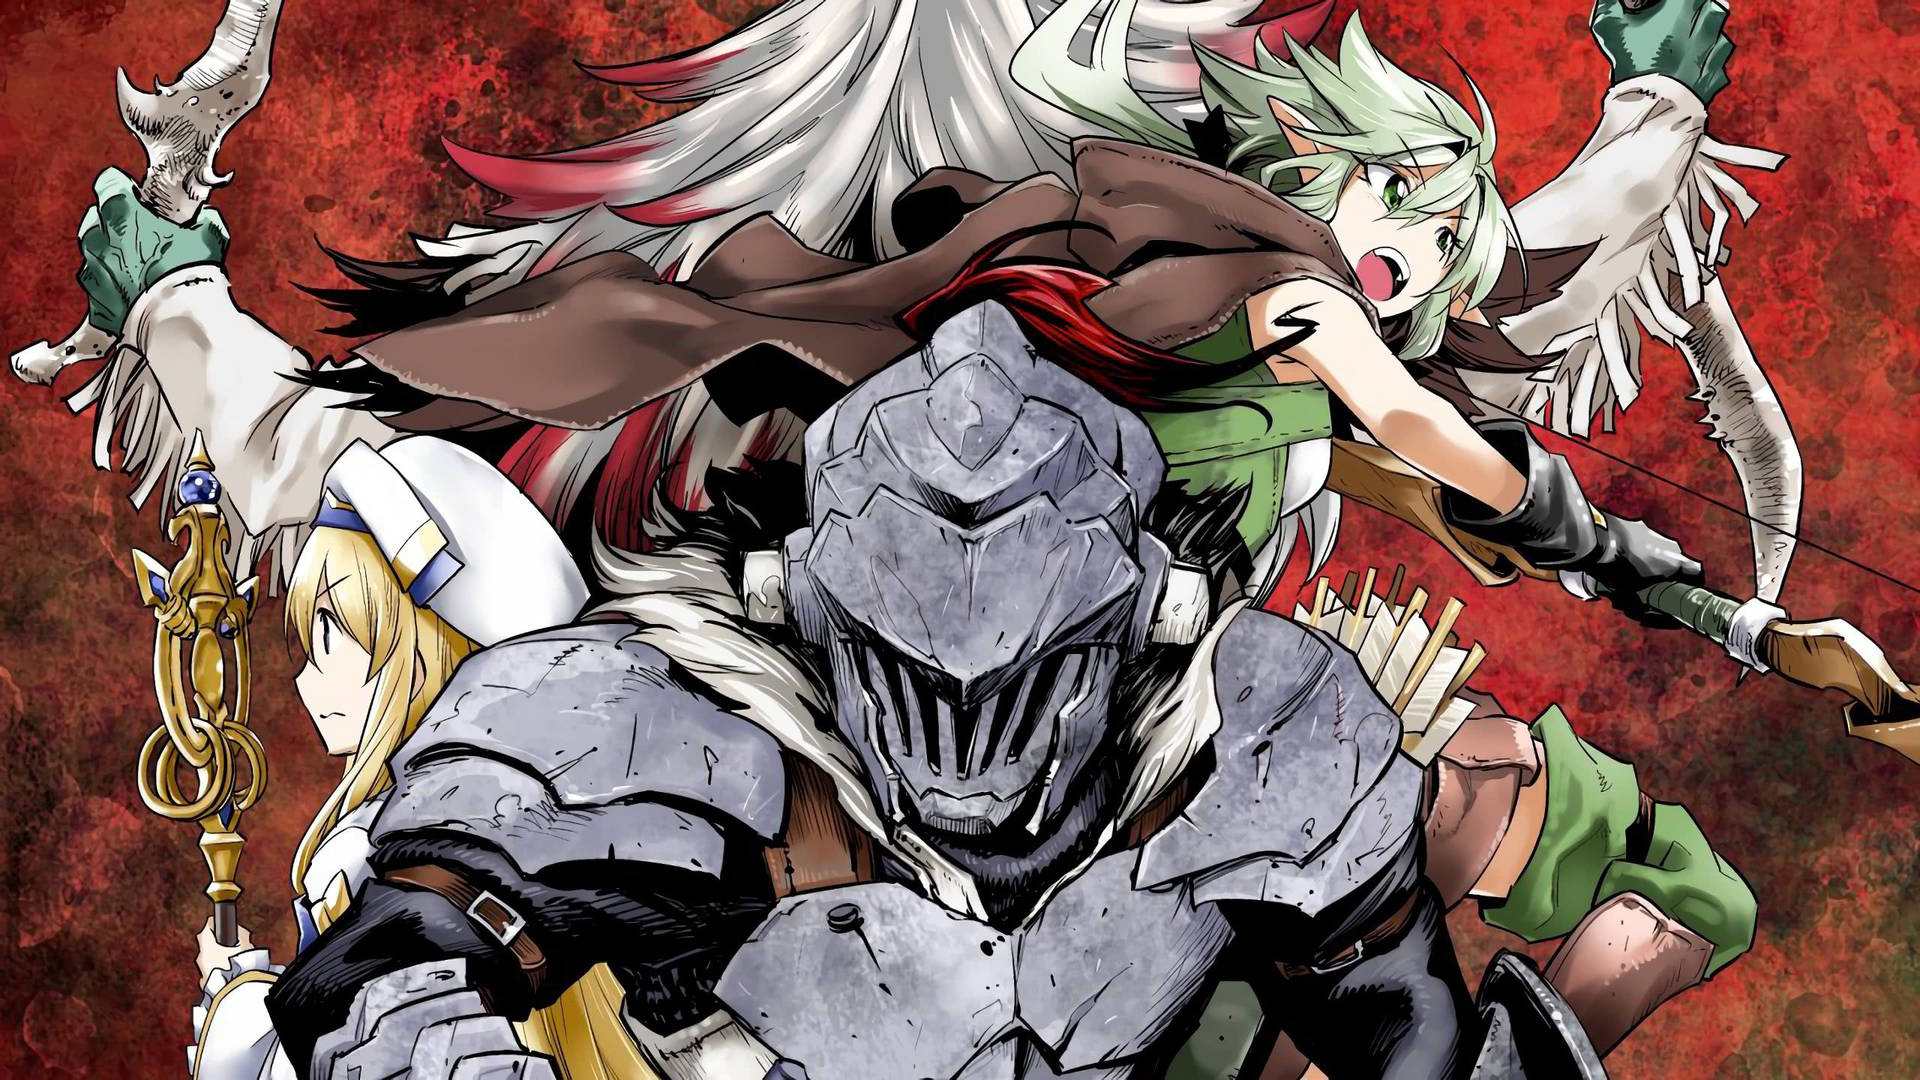 Goblin Slayer and High Elf Archer team up to take on the monsters! Wallpaper